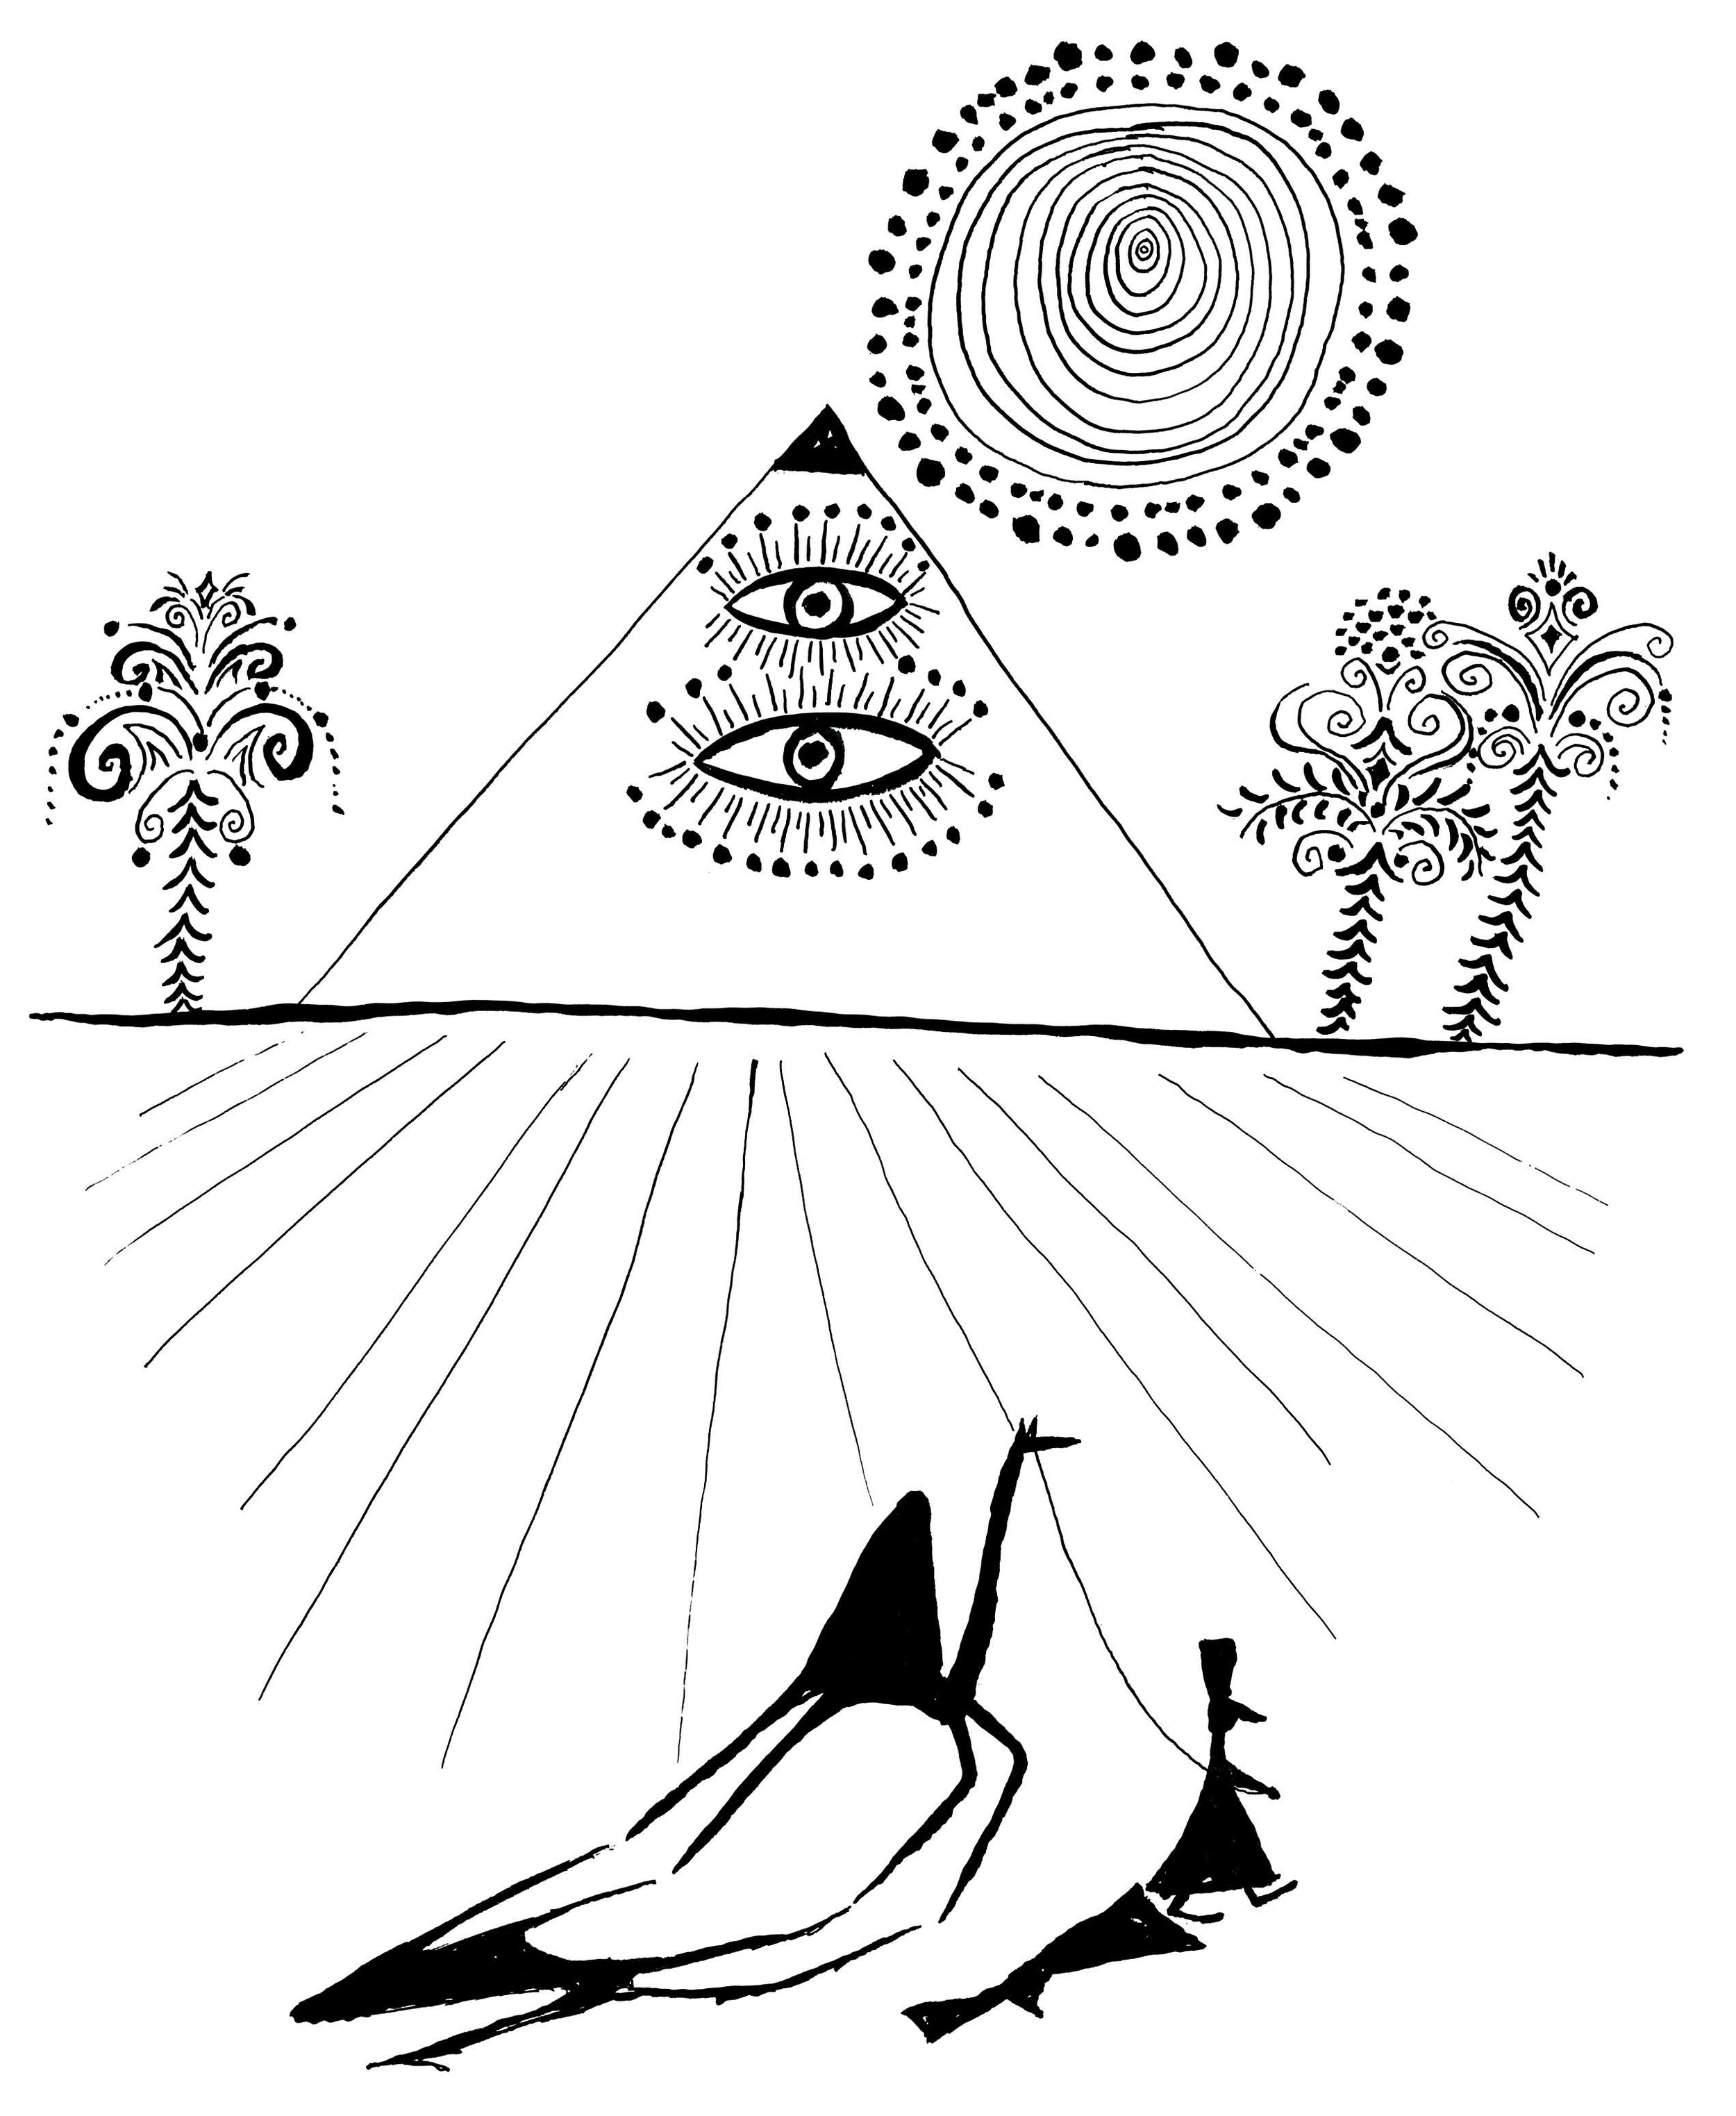   Pyramid with Eyes    Ink on paper 1963   